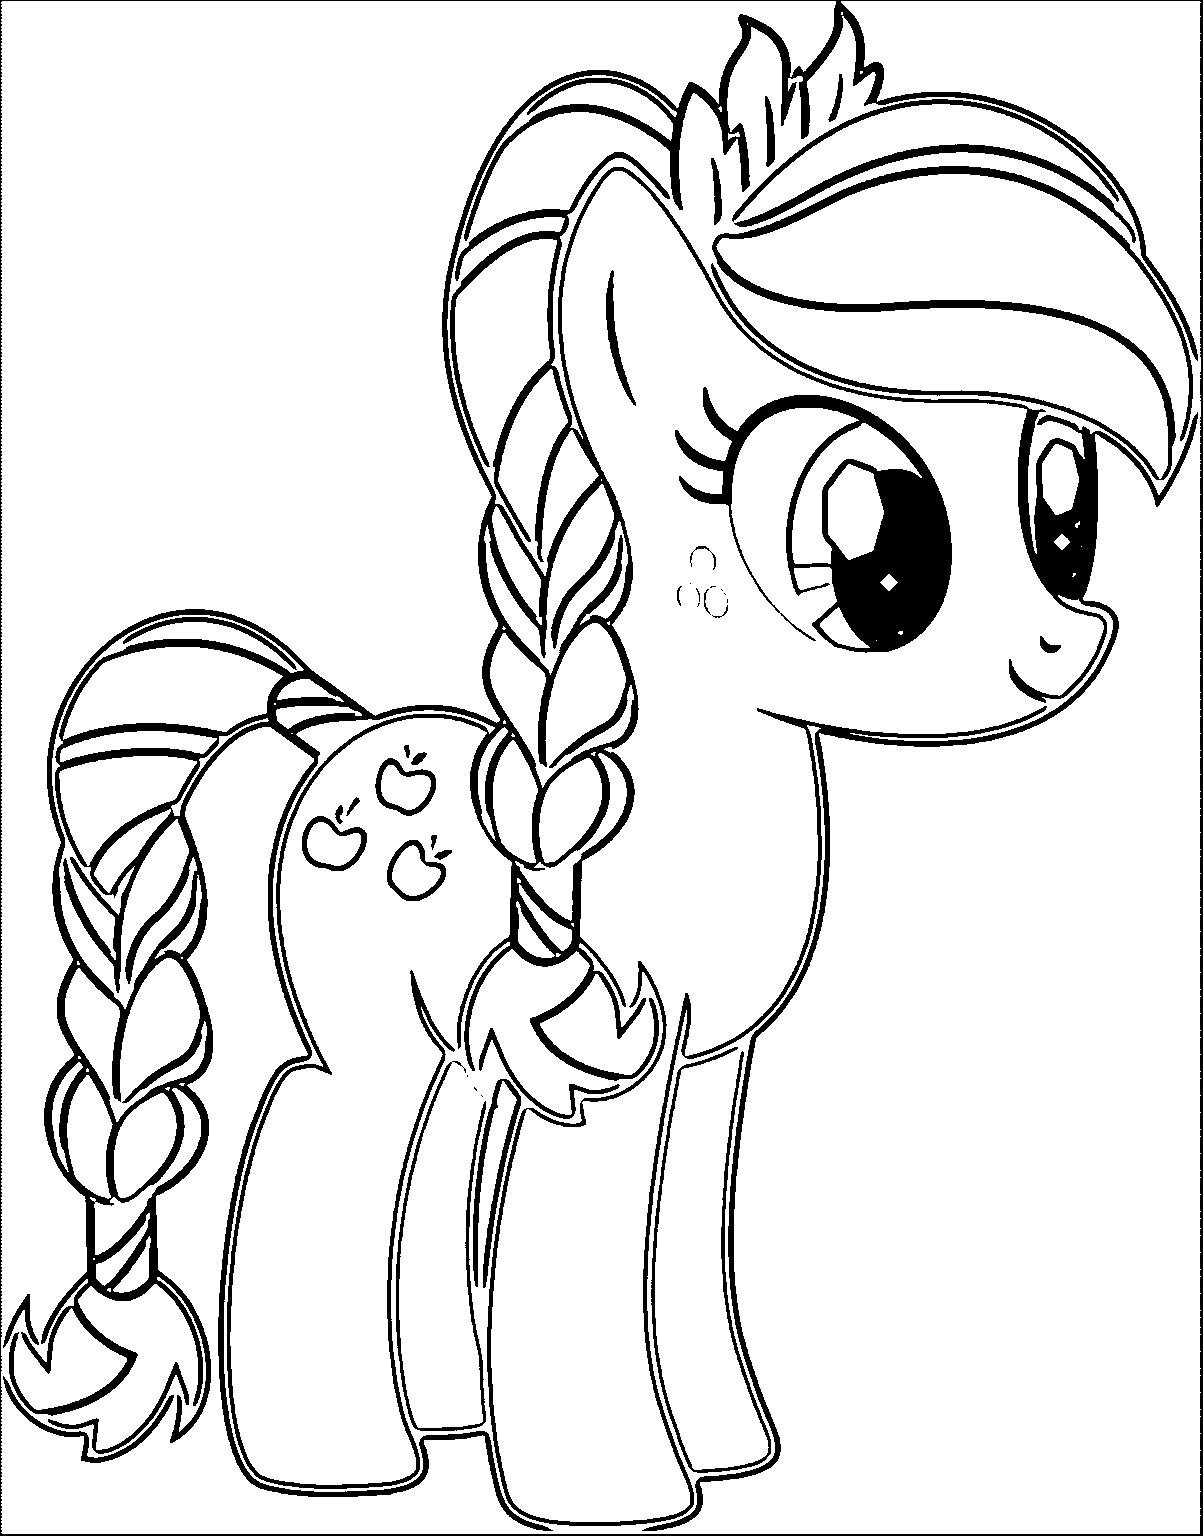 Pony Cartoon My Little Pony Coloring Page 003